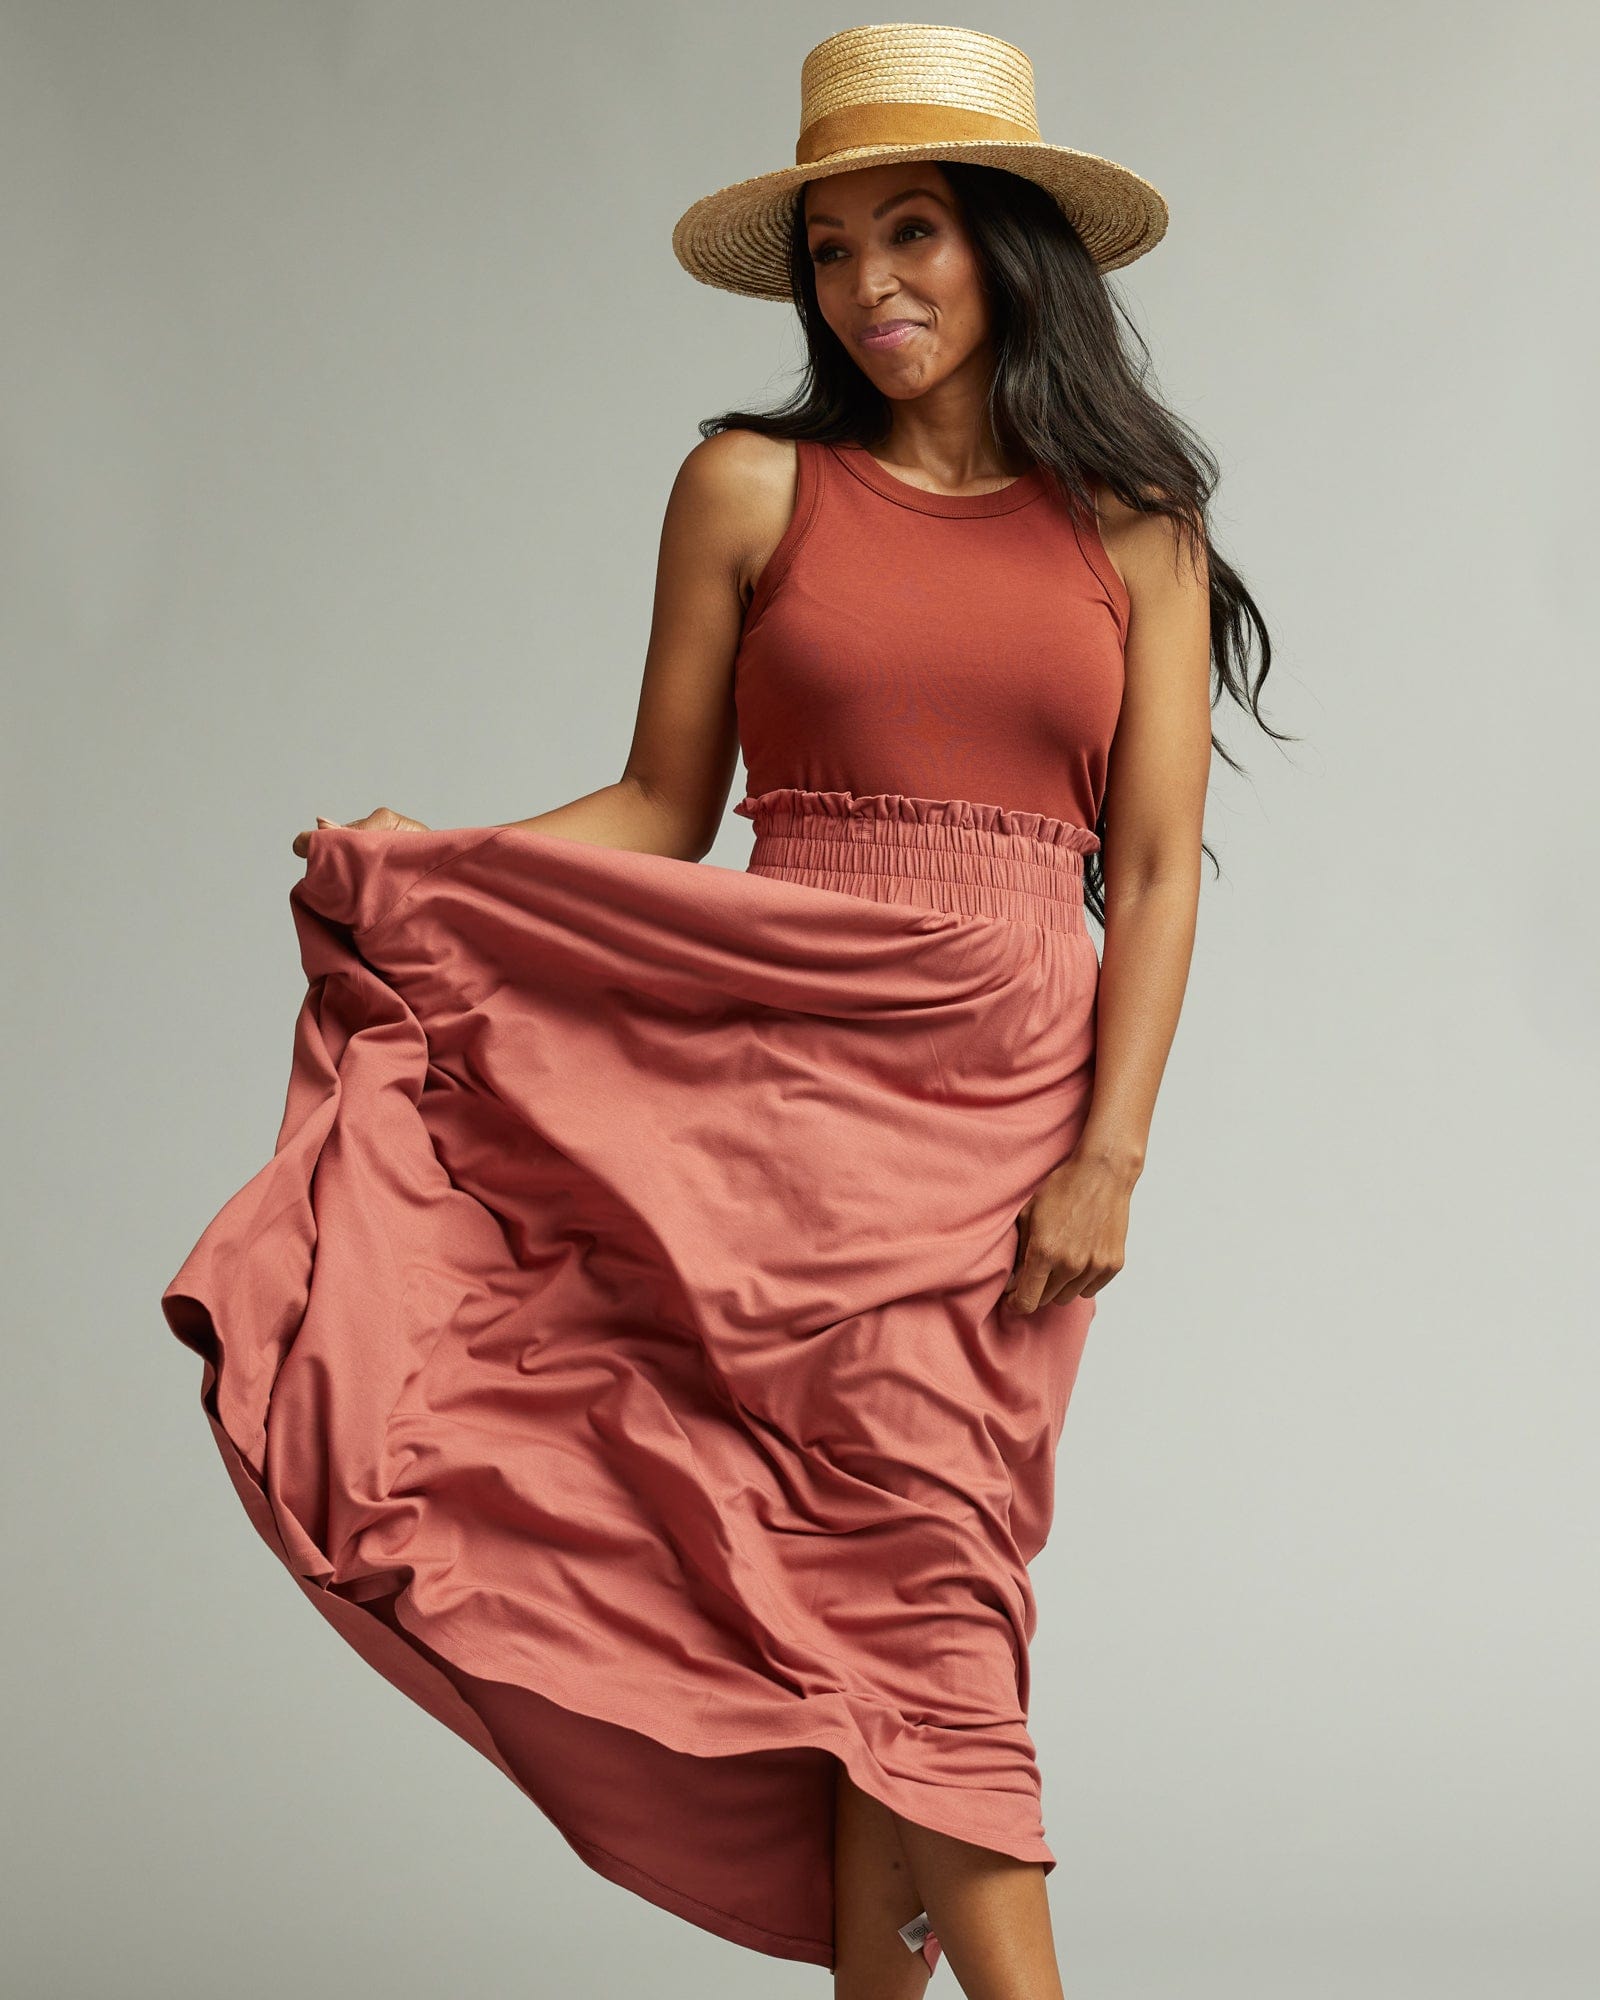 Woman in a pink maxi skirt